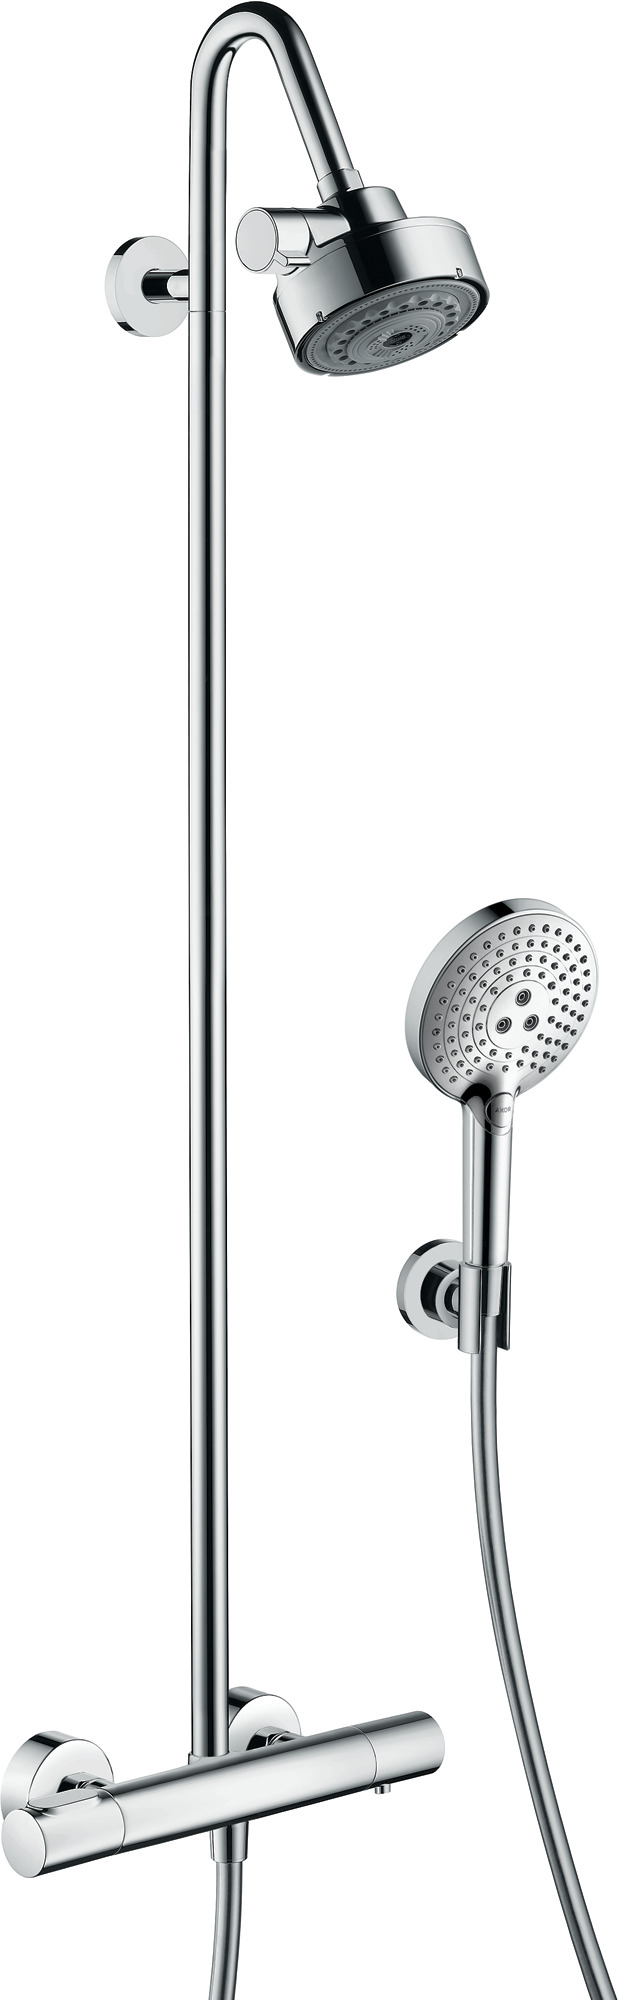 AXOR Citterio M Showerpipe mit Thermostat und Kopfbrause 120 3jet Polished Gold Optic